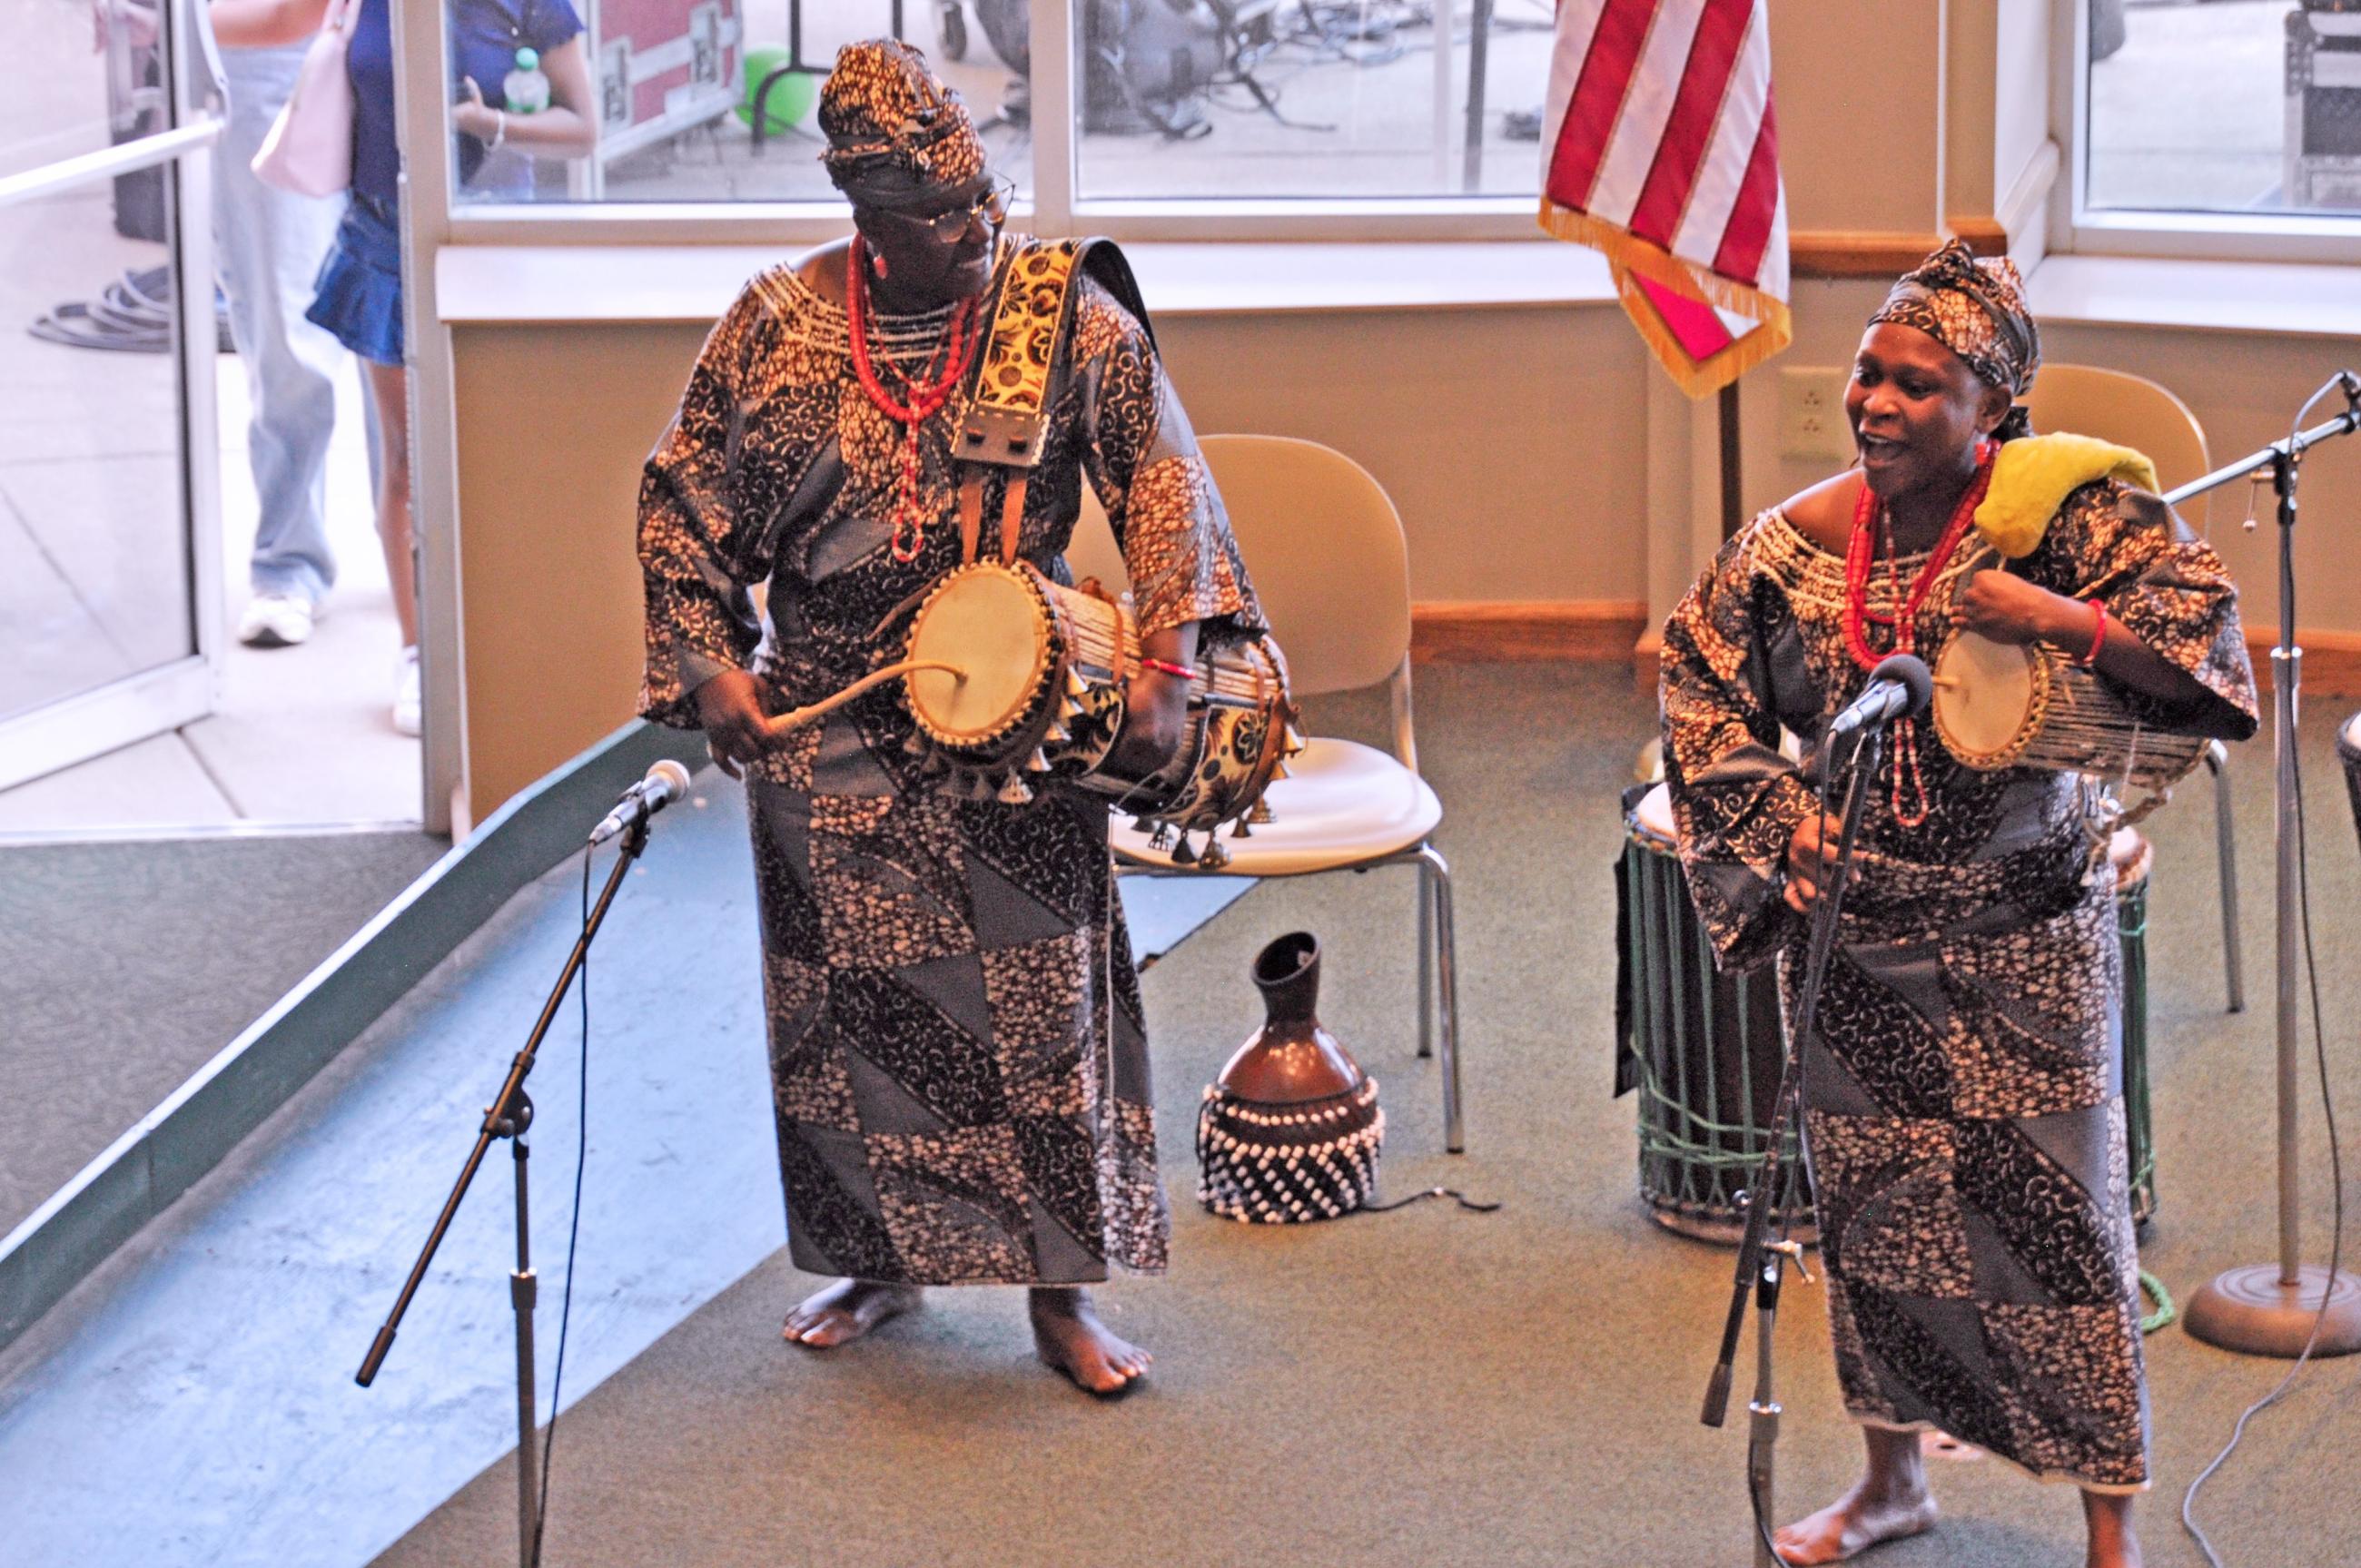 Two women in traditional African dress singing and playing drums